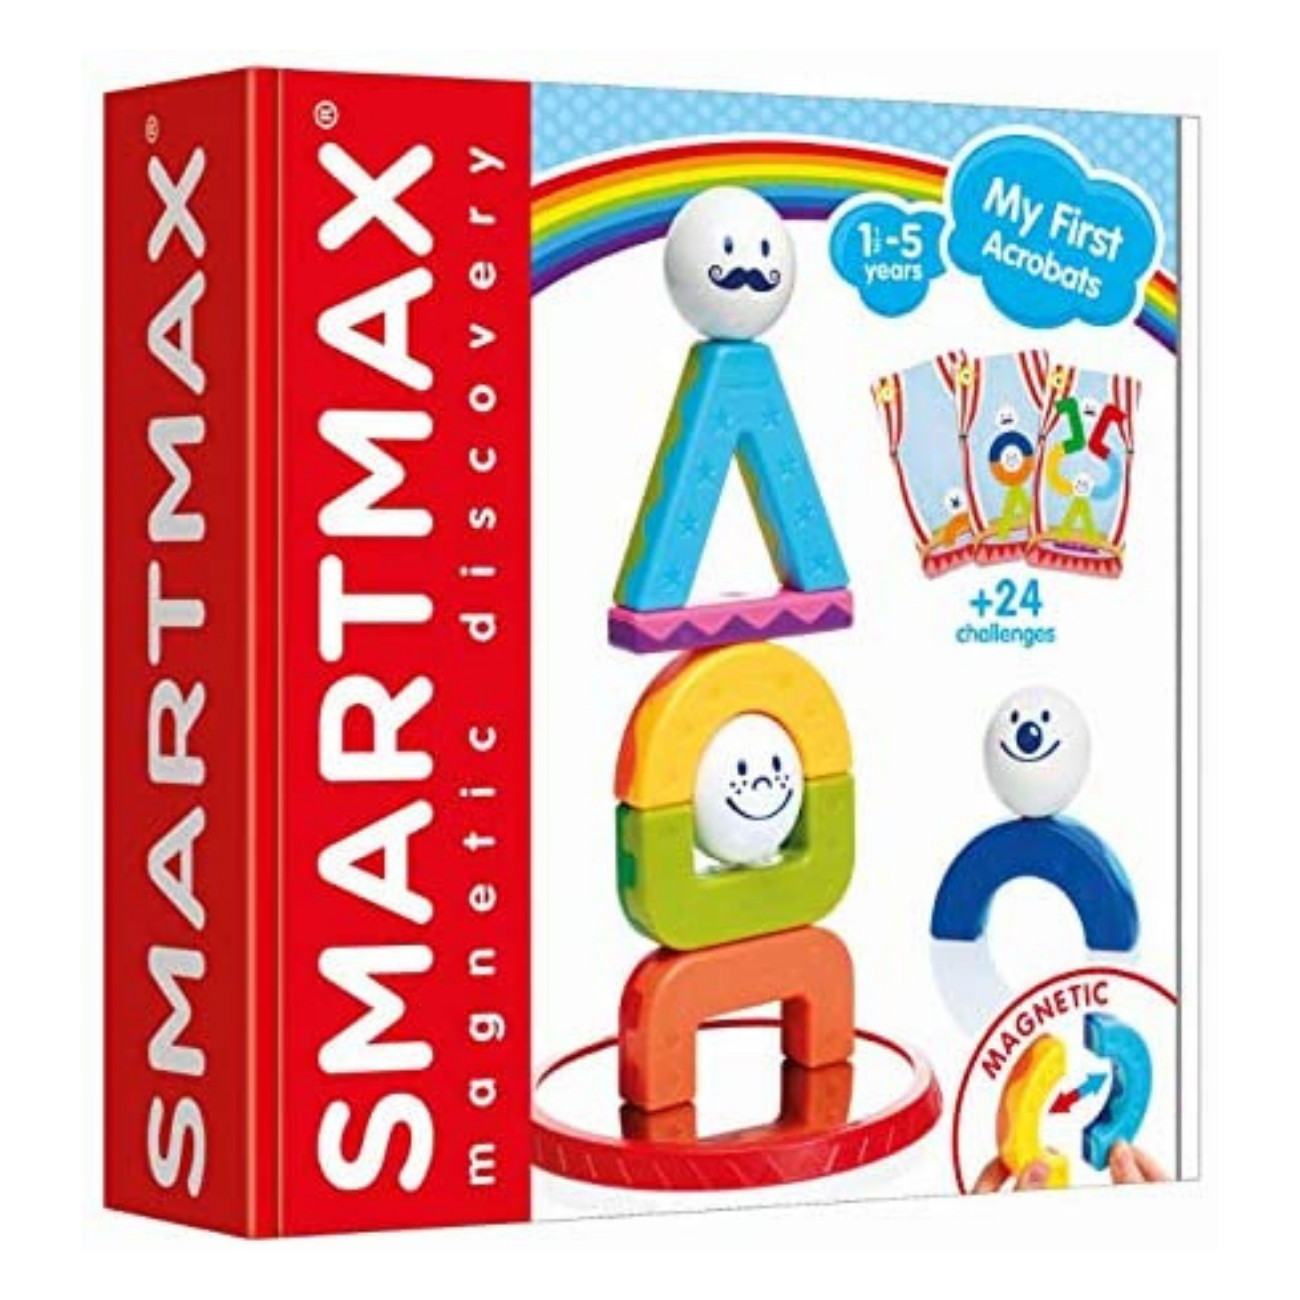 SmartMax Magnetic Discovery My First Animal Friends Building 9 PC Set 1 - 5  Yrs